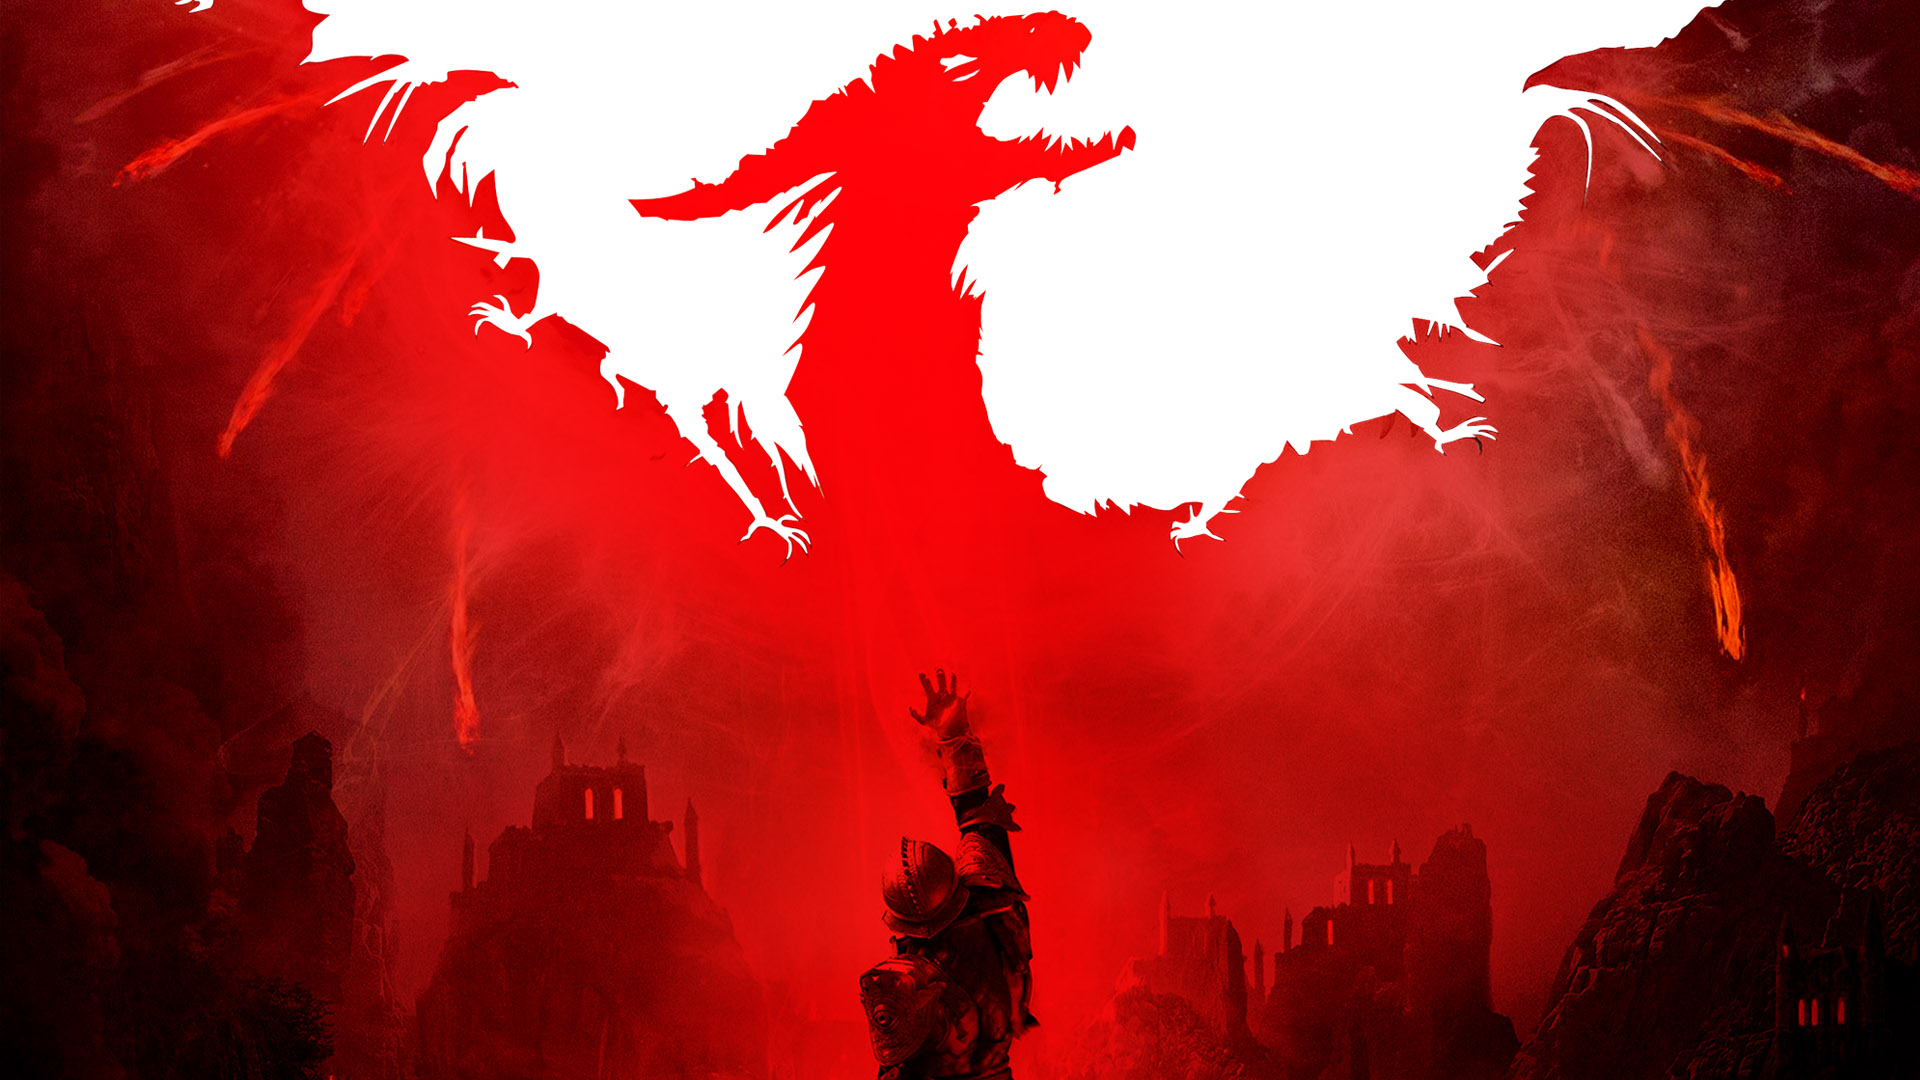 Account offers away Dragon Age Inquisition to kick off annual Mega sale